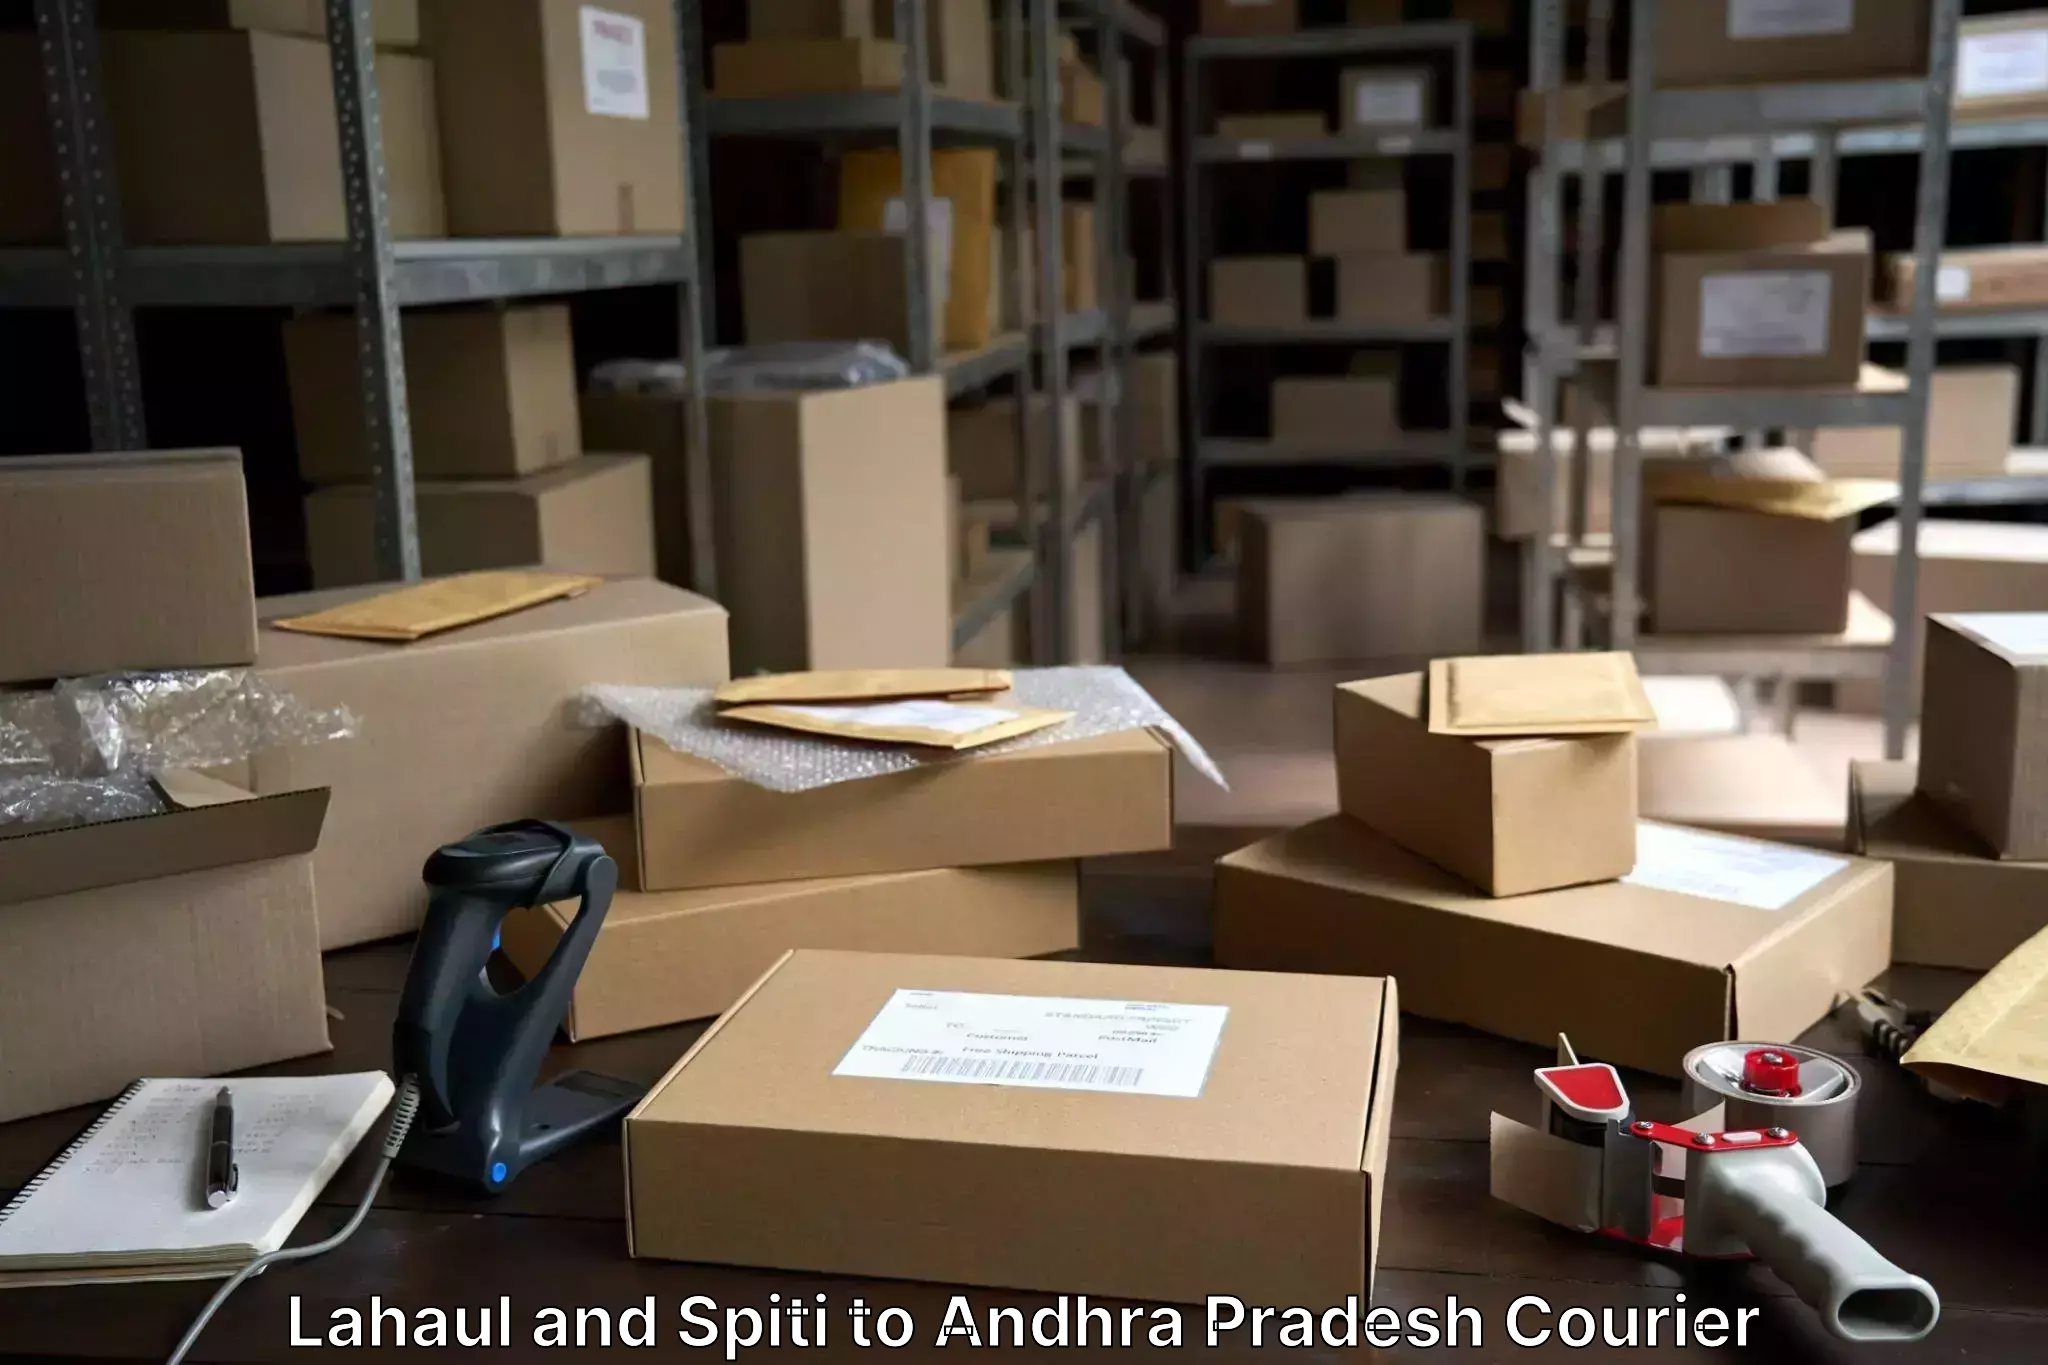 Luggage transport consulting Lahaul and Spiti to Andhra Pradesh